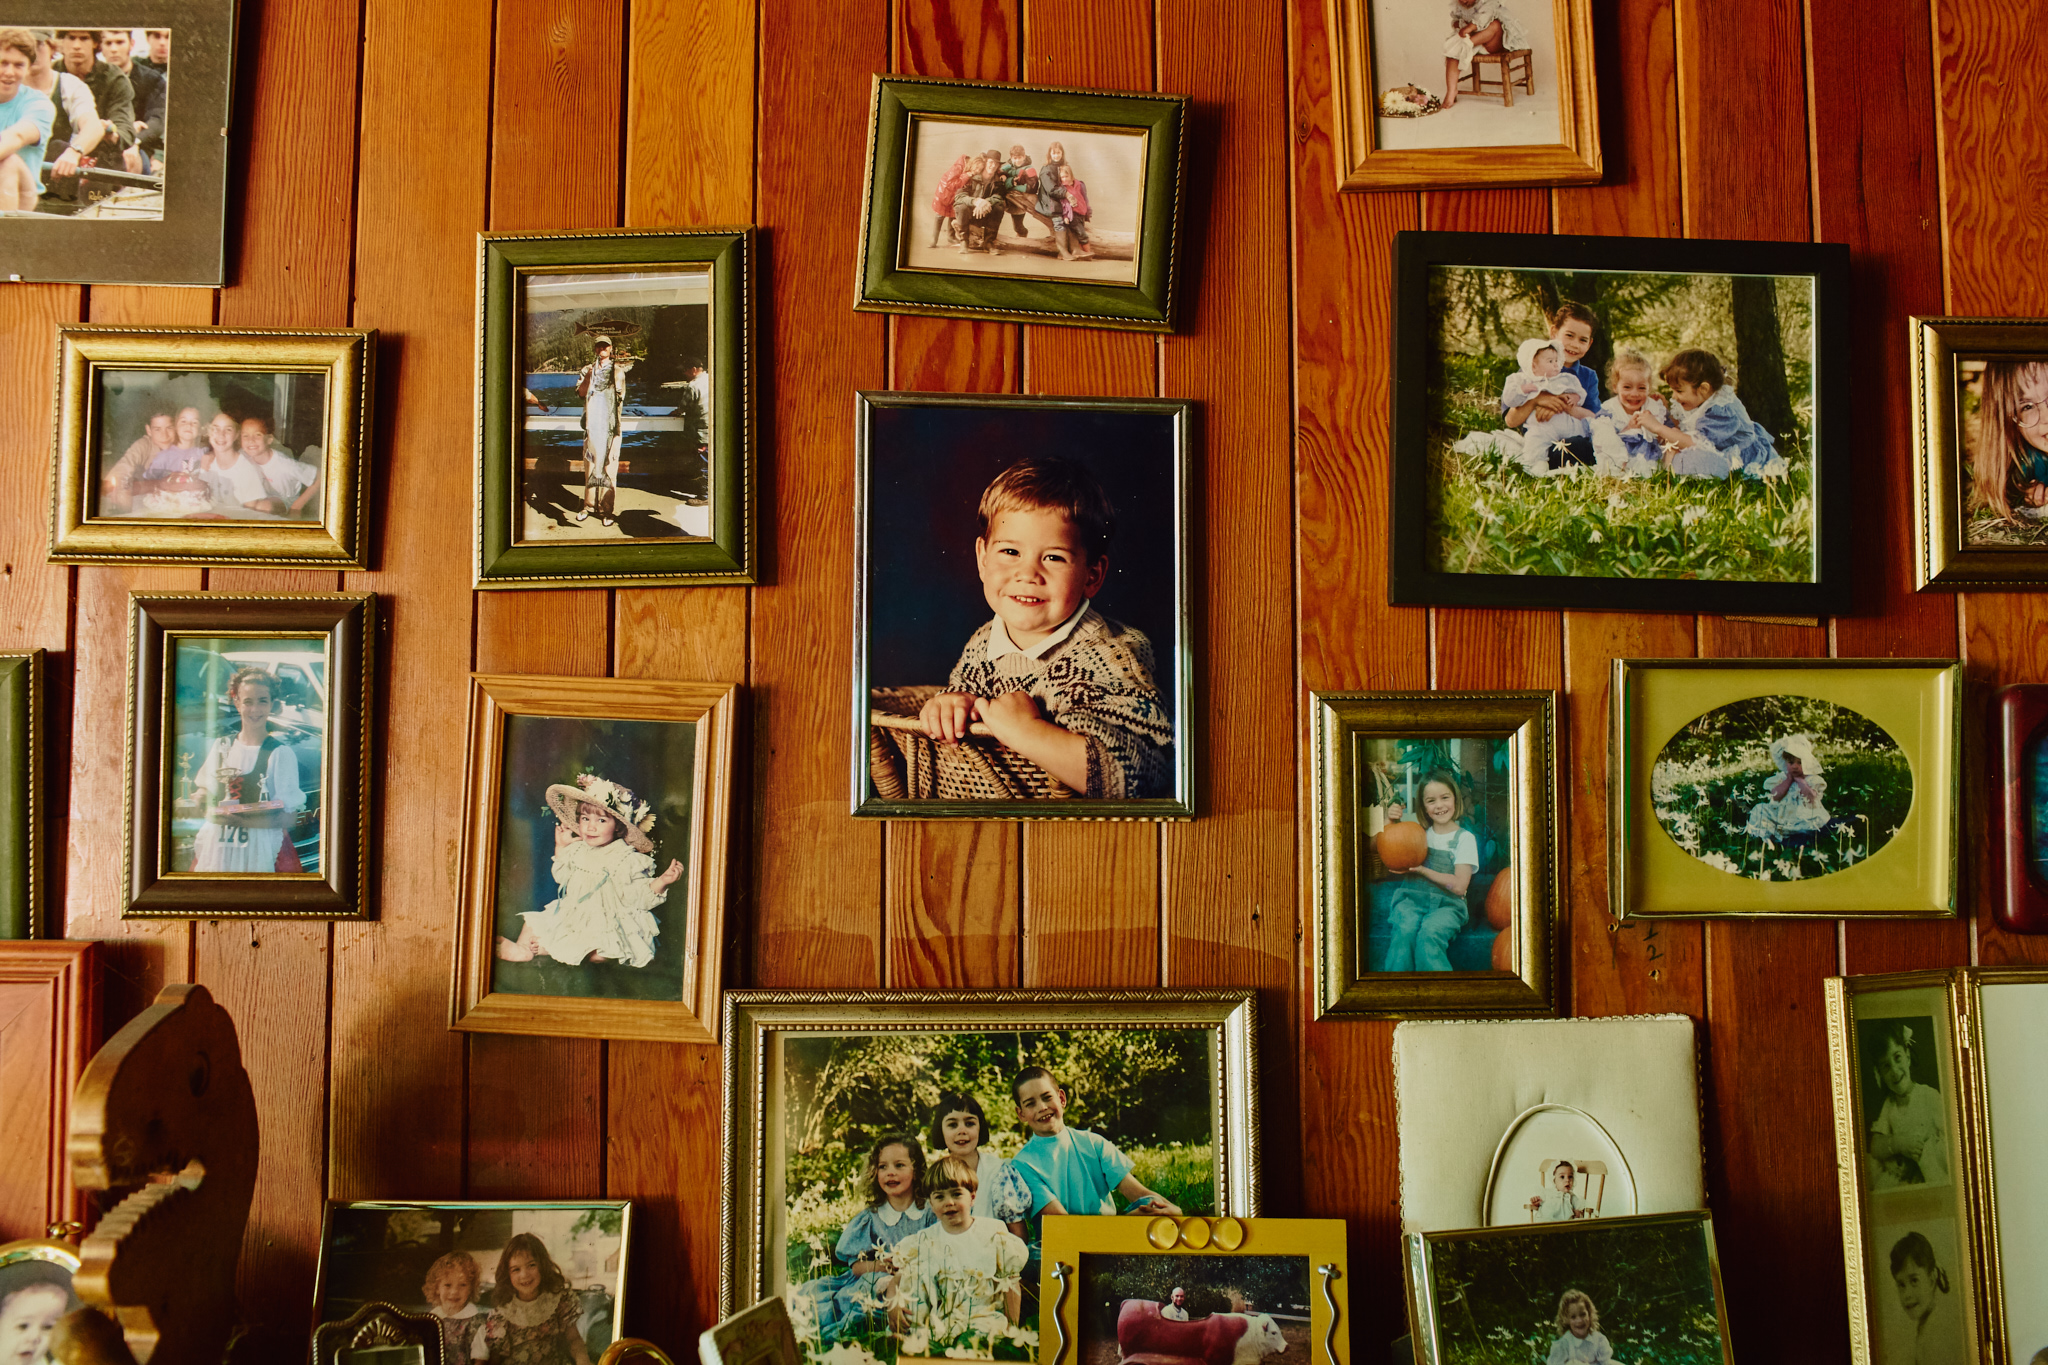 Wood panelled wall featuring a display of family photographs